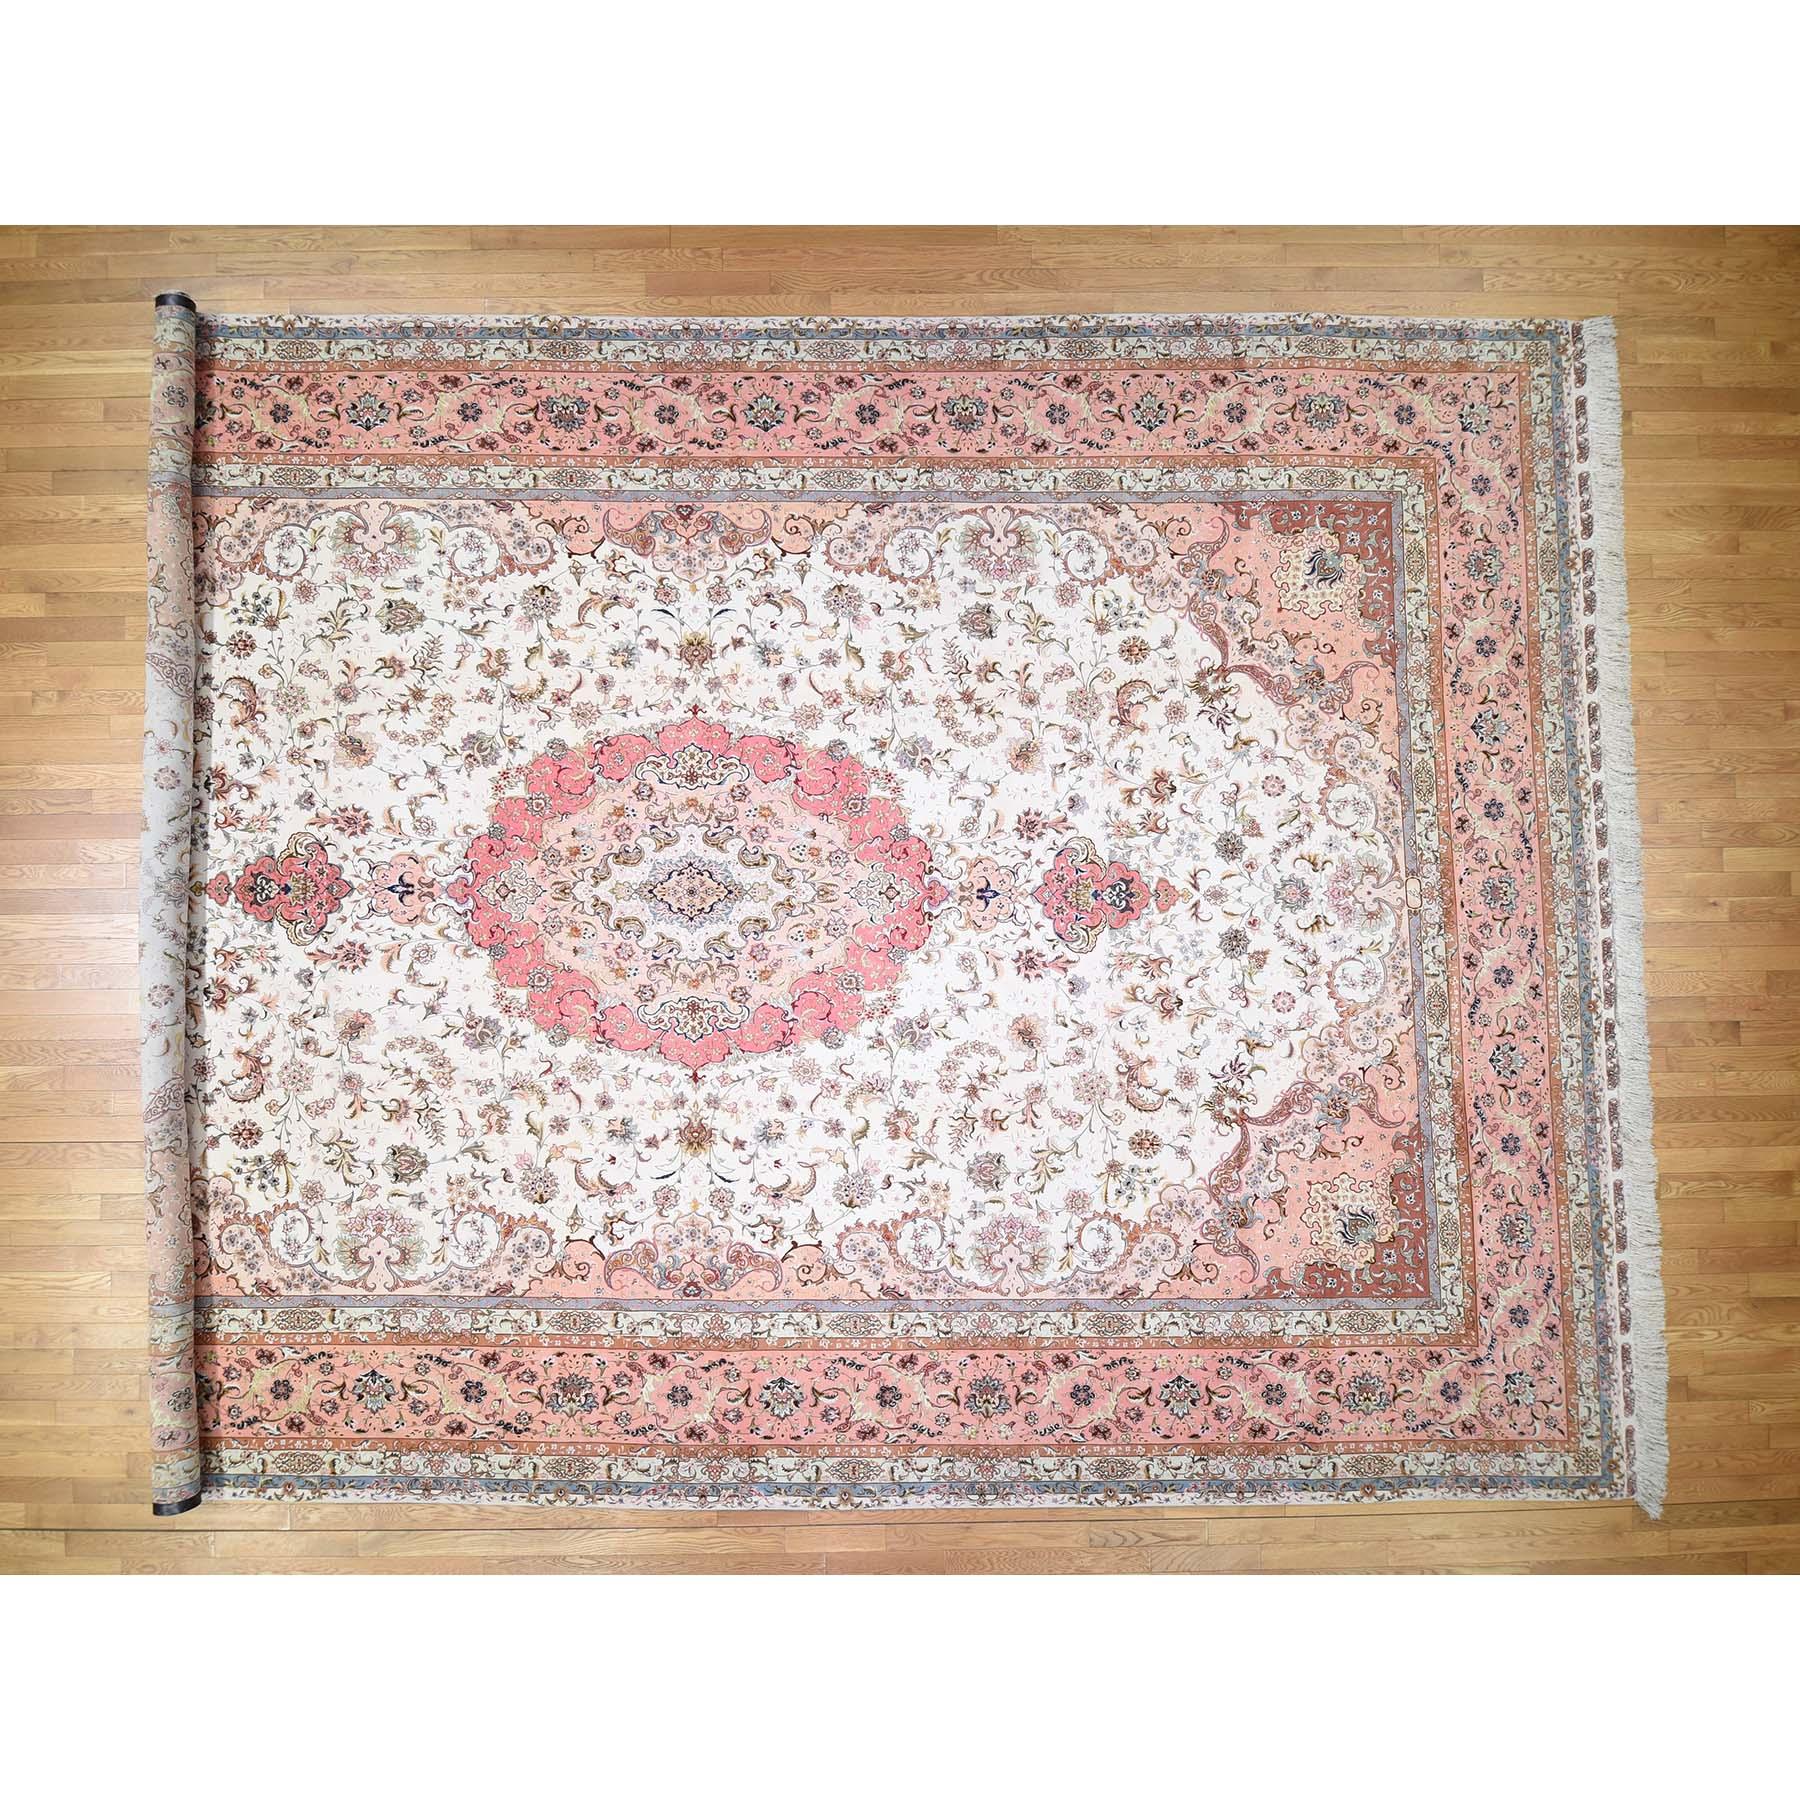 This is a truly genuine one-of-a-kind hand knotted Persian Tabriz 400 Kpsi mansion size wool and silk oriental rug. It has been knotted for months and months in the centuries-old Persian weaving craftsmanship techniques by expert artisans.
Primary